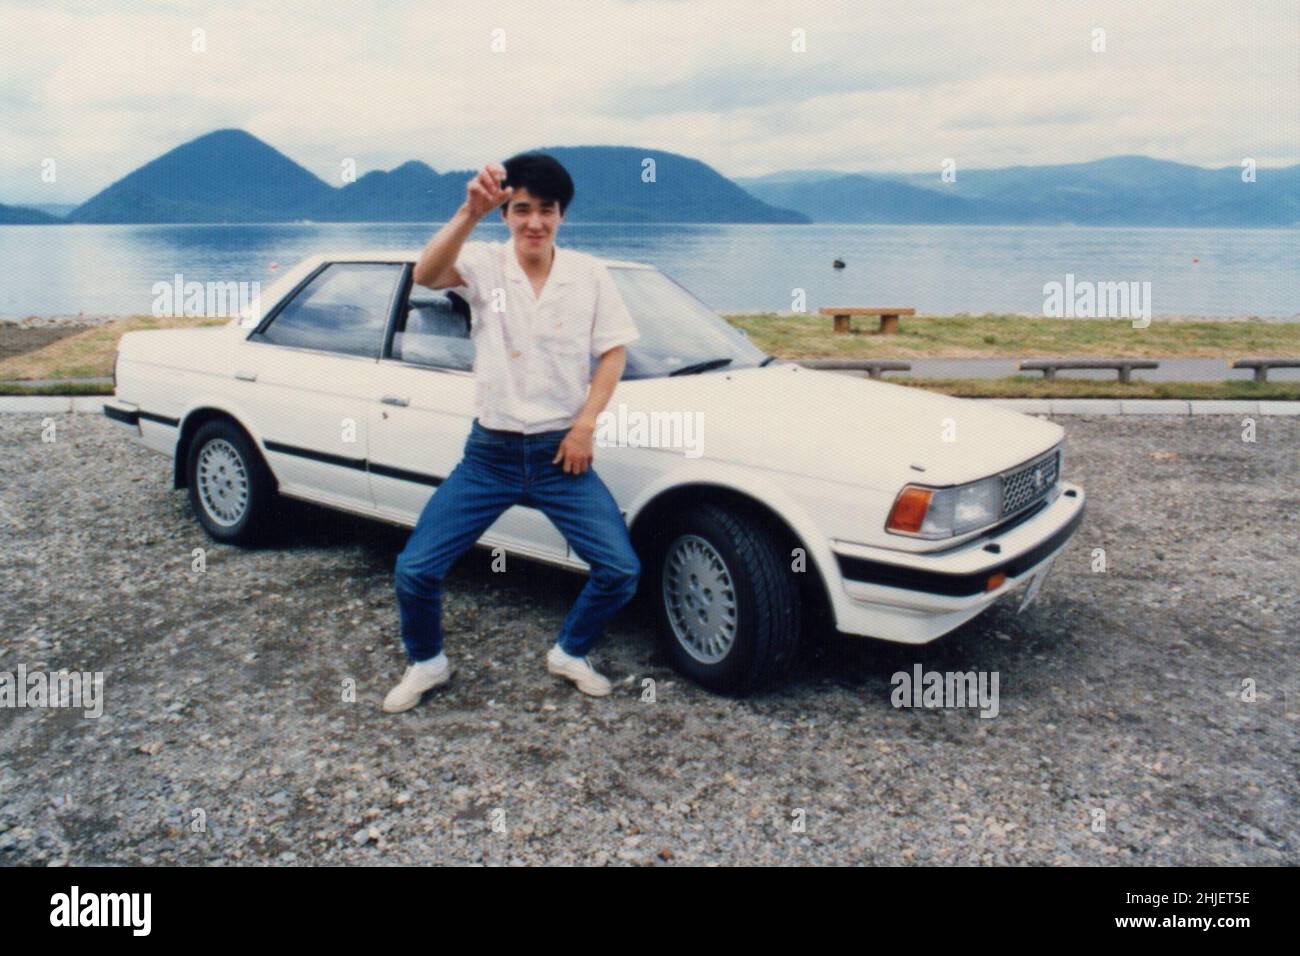 Man Portrait with Toyota Car Chaser. Scanned Copy of Archival Photo Stock Photo